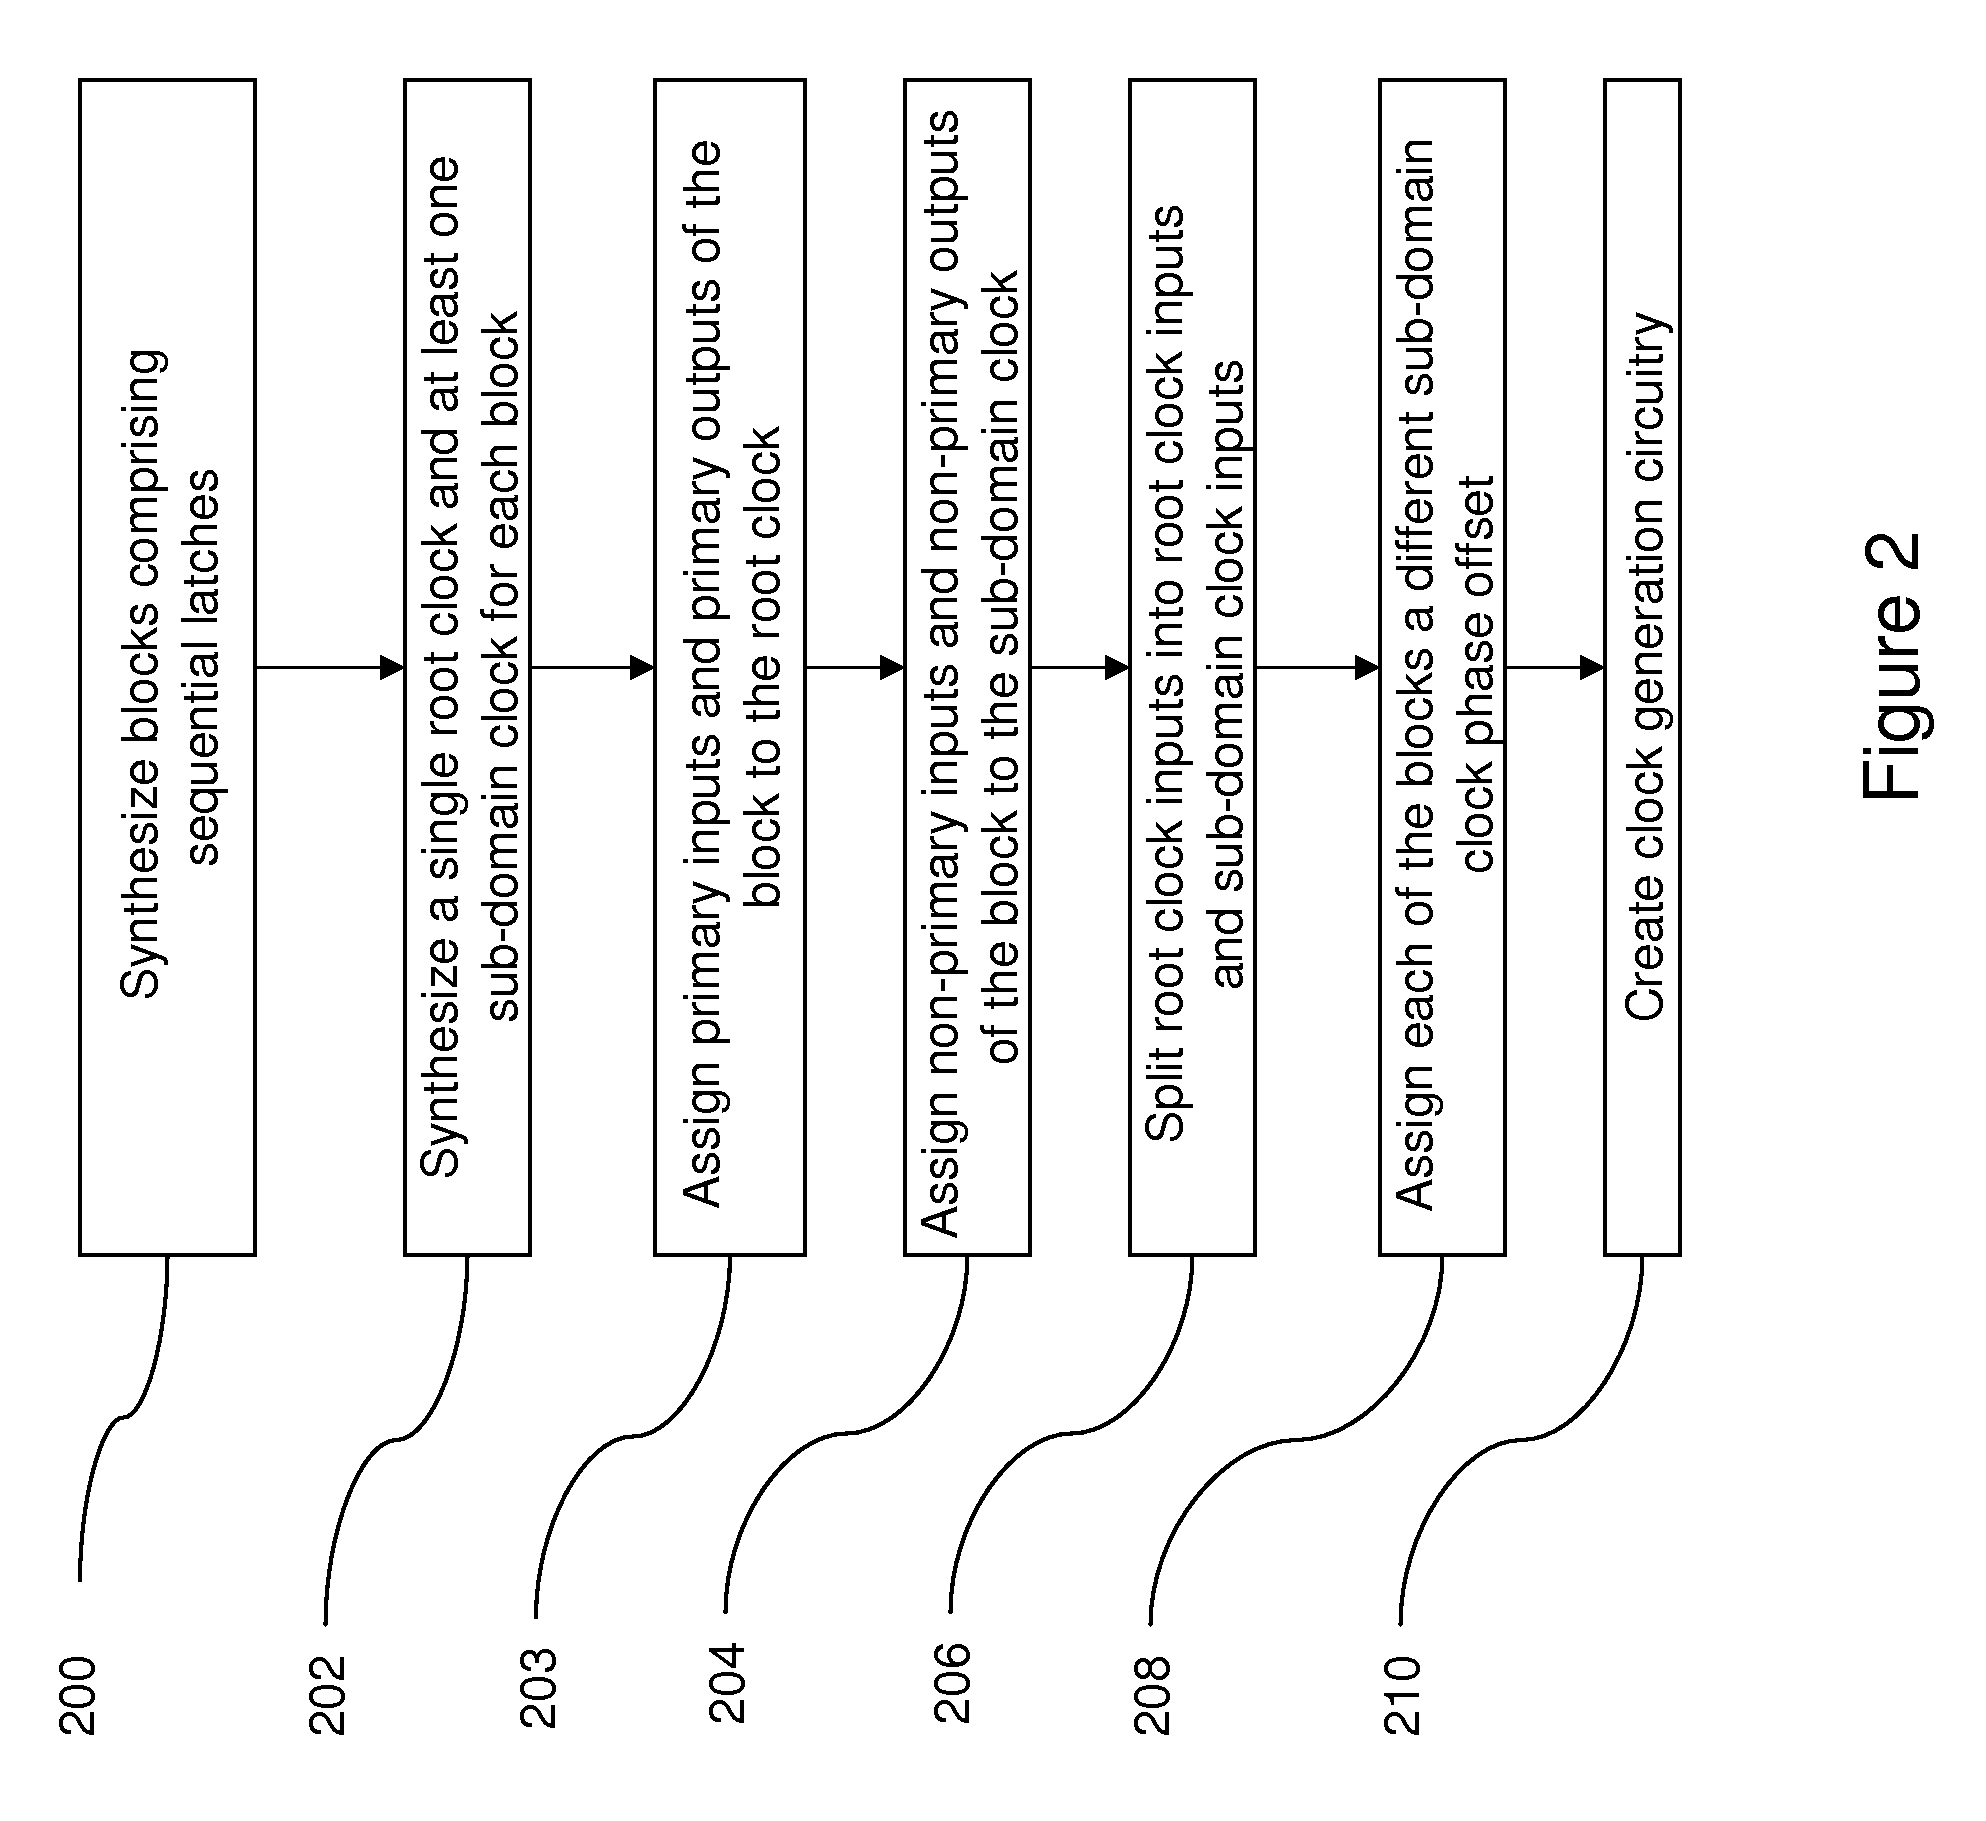 Transition balancing for noise reduction /Di/Dt reduction during design, synthesis, and physical design